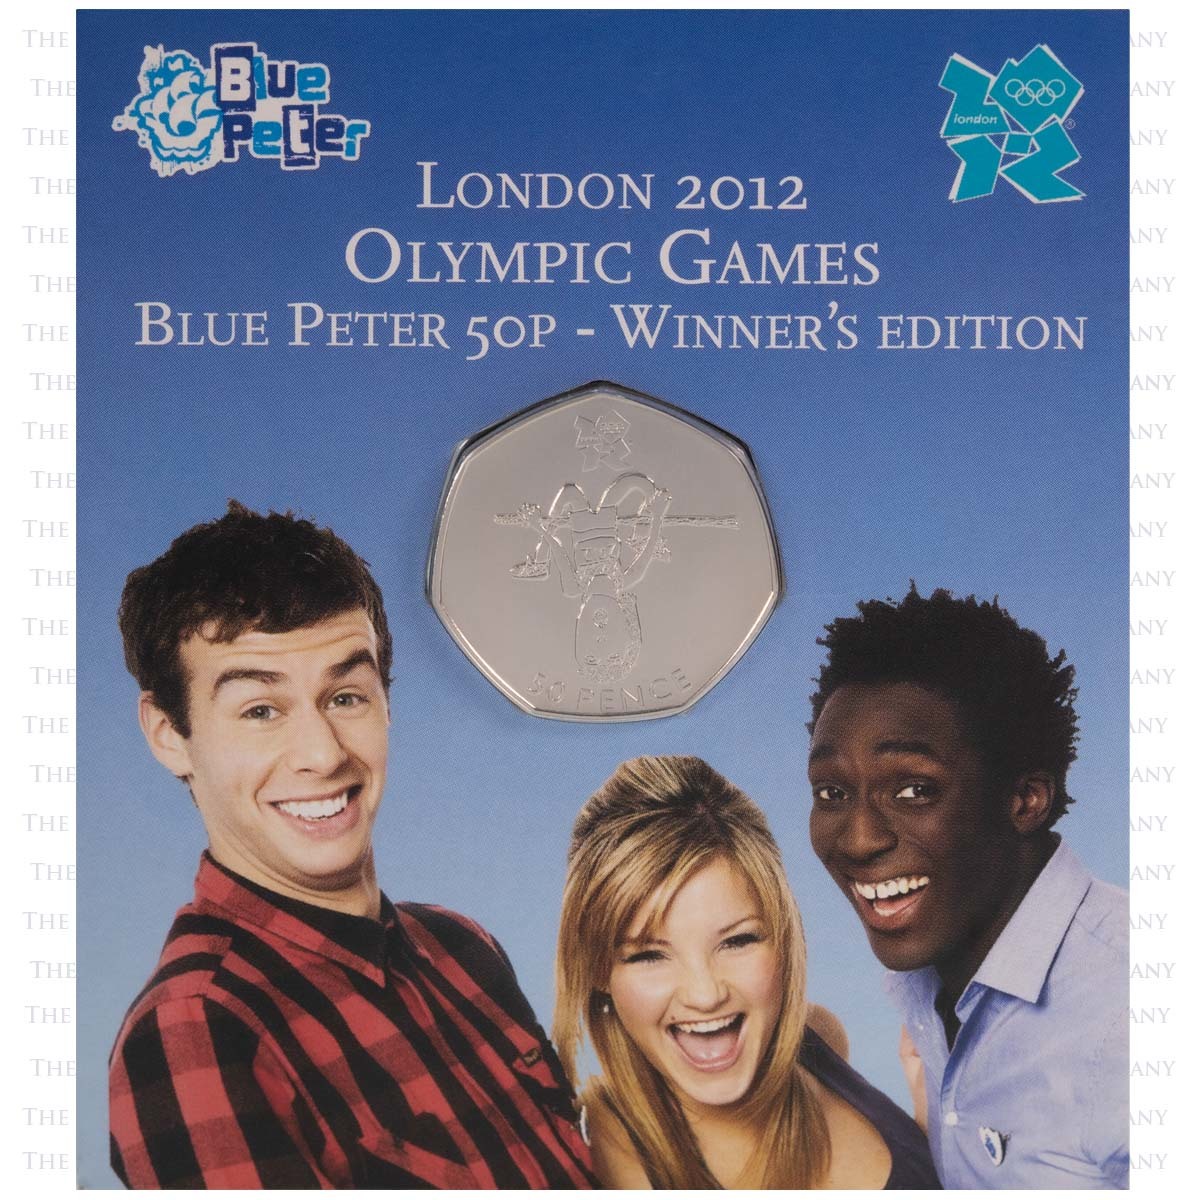 2009 London Olympics Athletics 50p Brilliant Uncirculated Coin Winner's Edition Blue Peter In Card